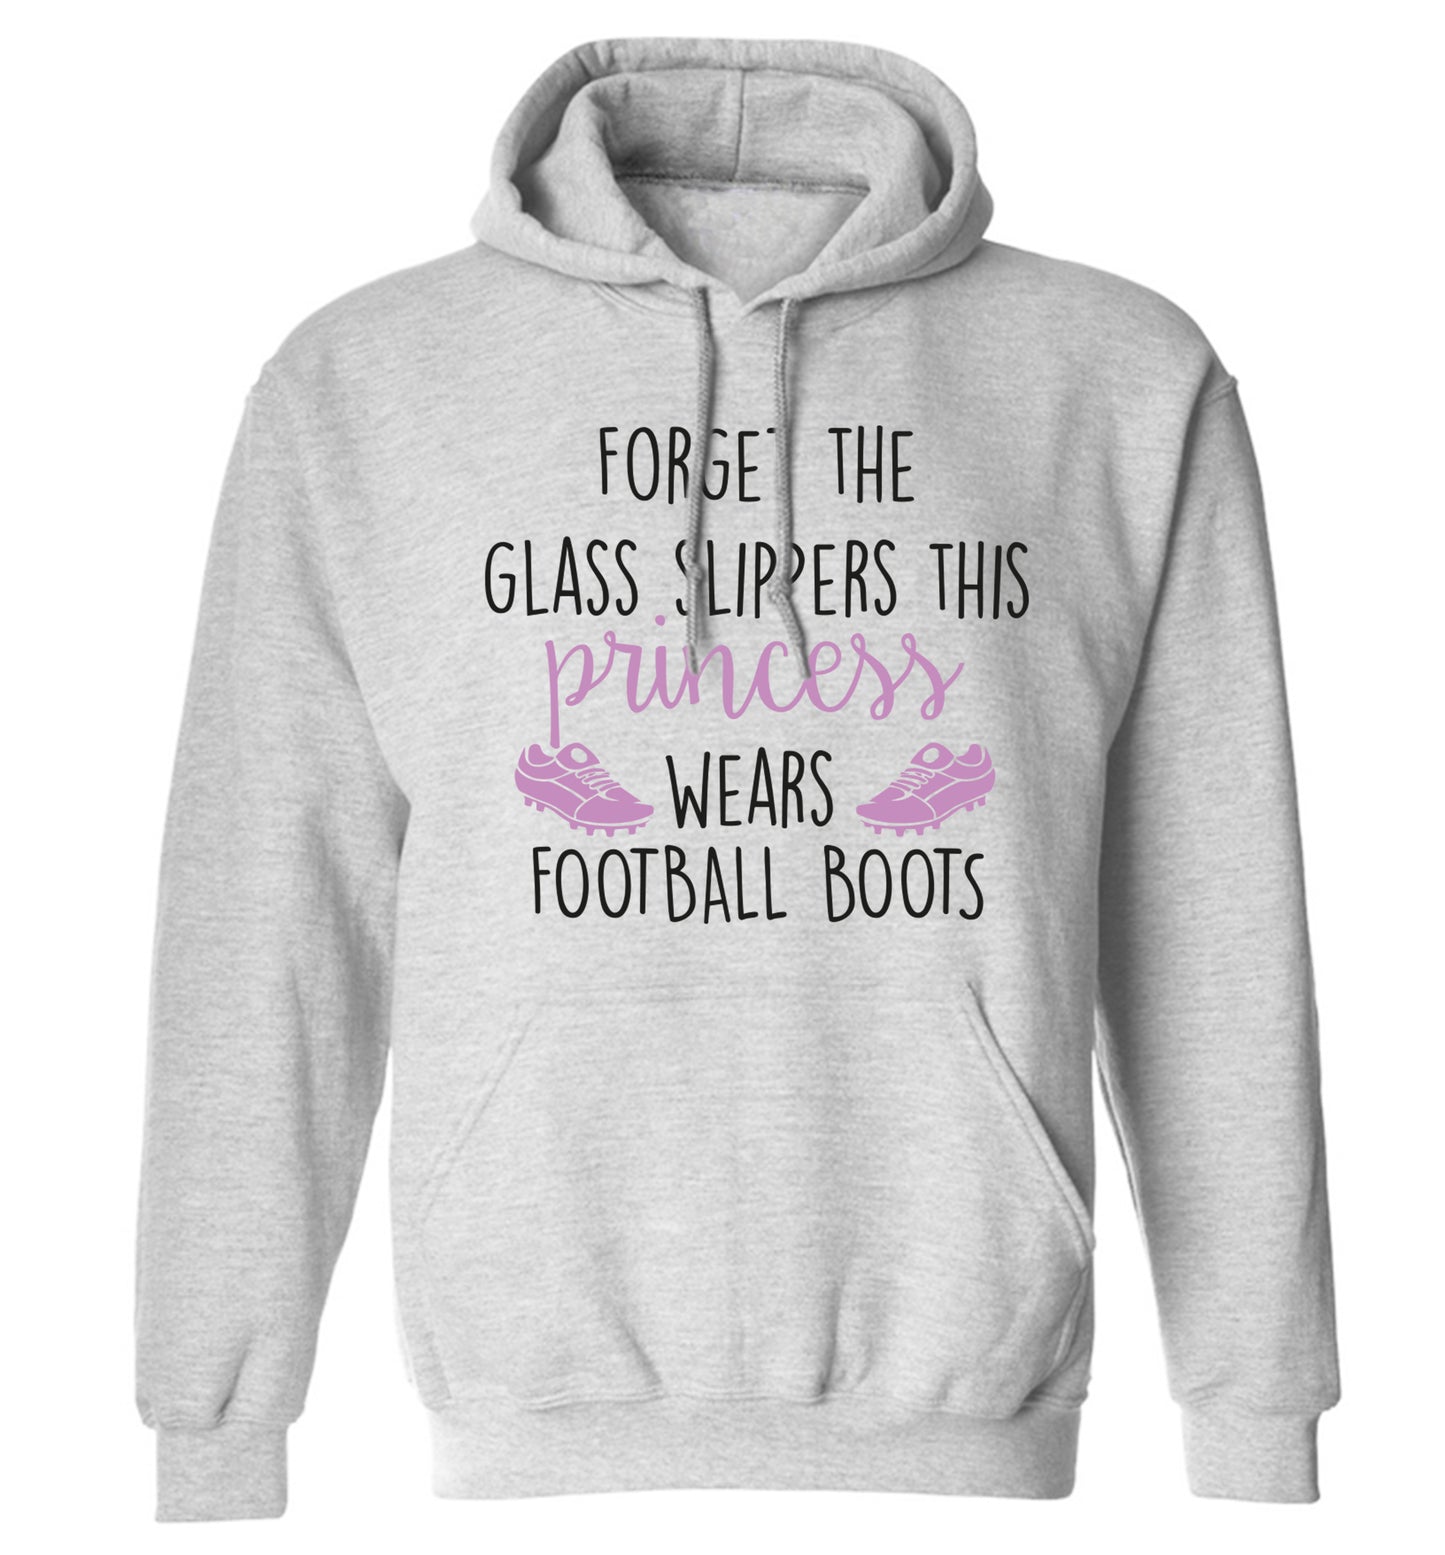 Forget the glass slippers this princess wears football boots adults unisex grey hoodie 2XL